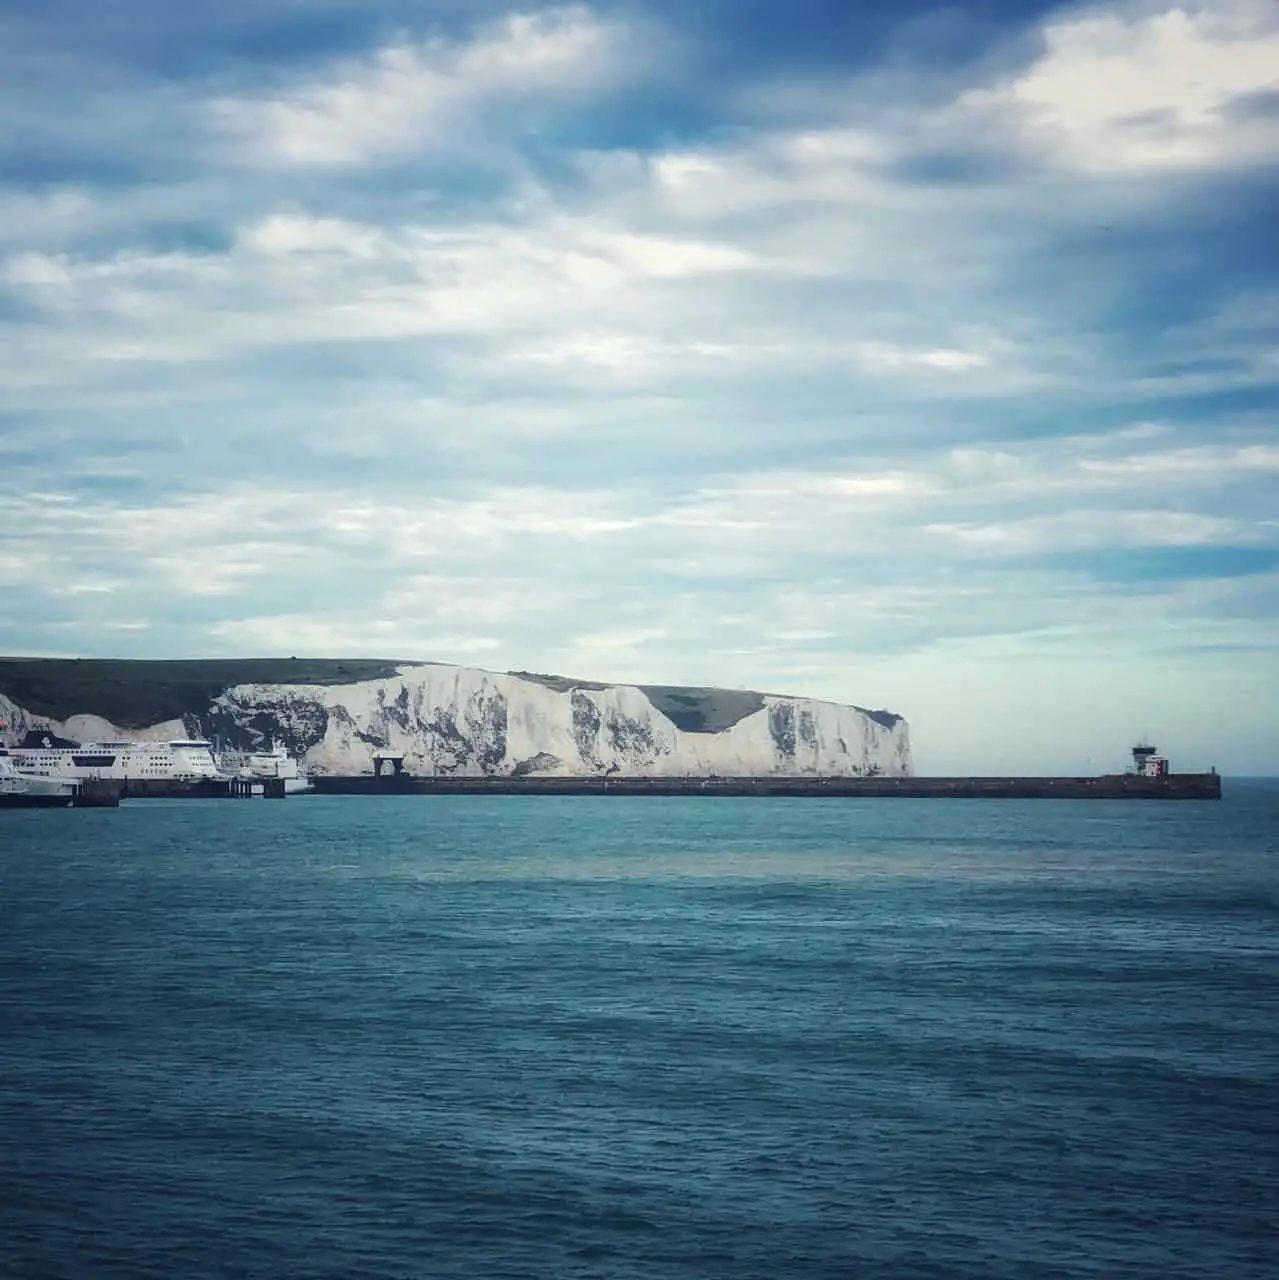 White Cliffs of Dover from the Disney Magic